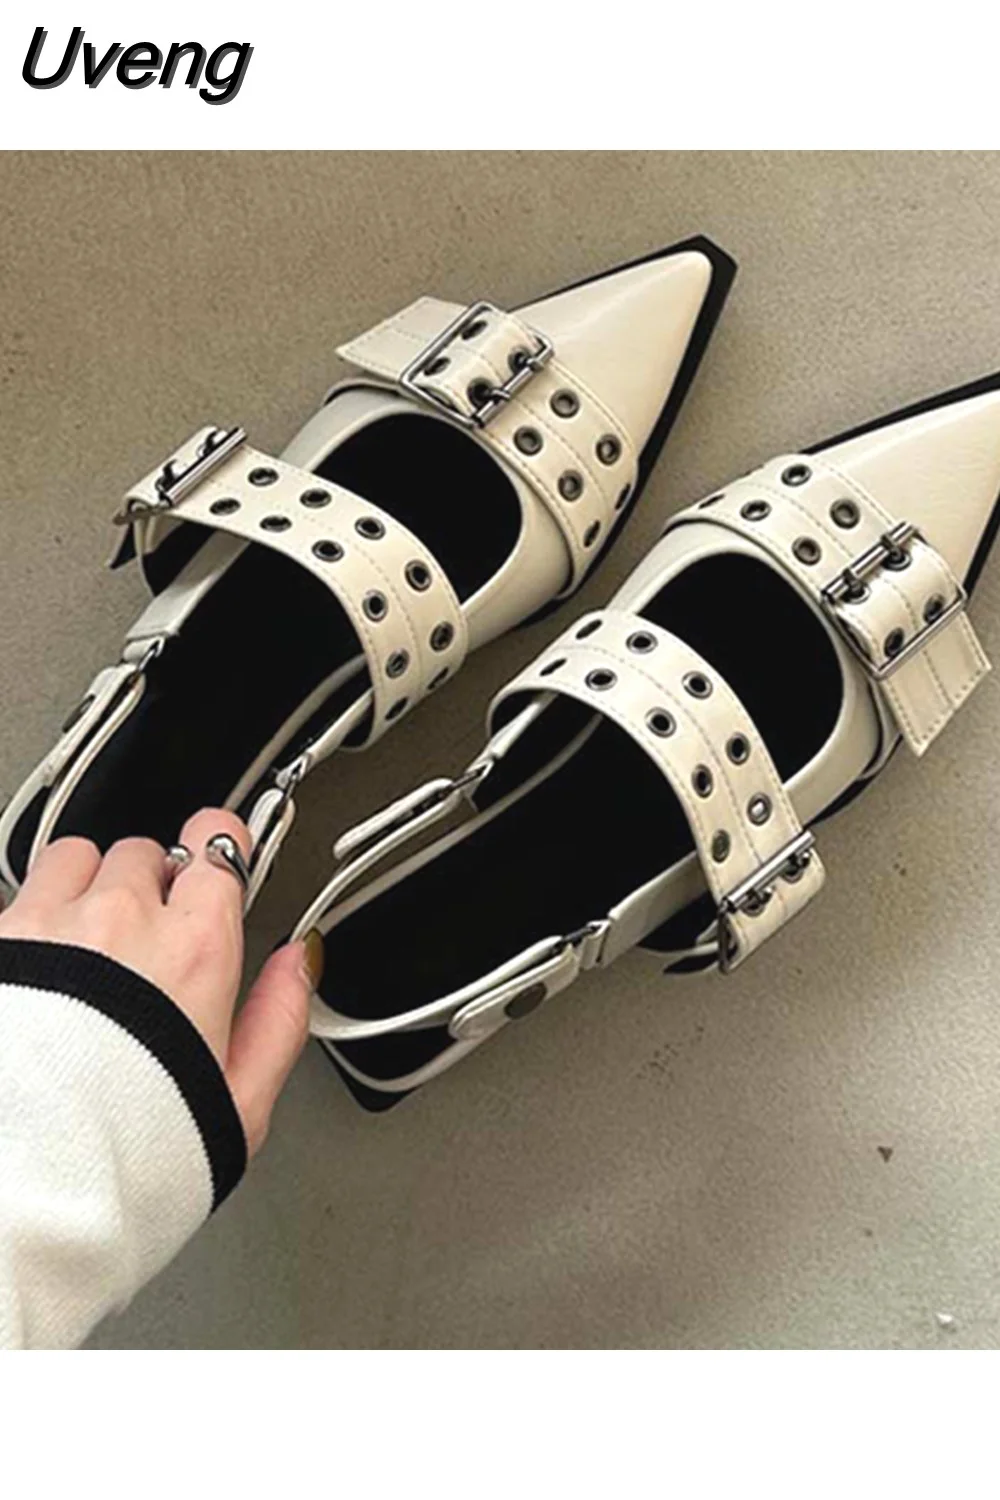 Uveng Women Sandals Retro Punk Style Pointed PU Leather Solid Sandals Casual Female Metal Buckle High Heels Pointed Toe Shoes